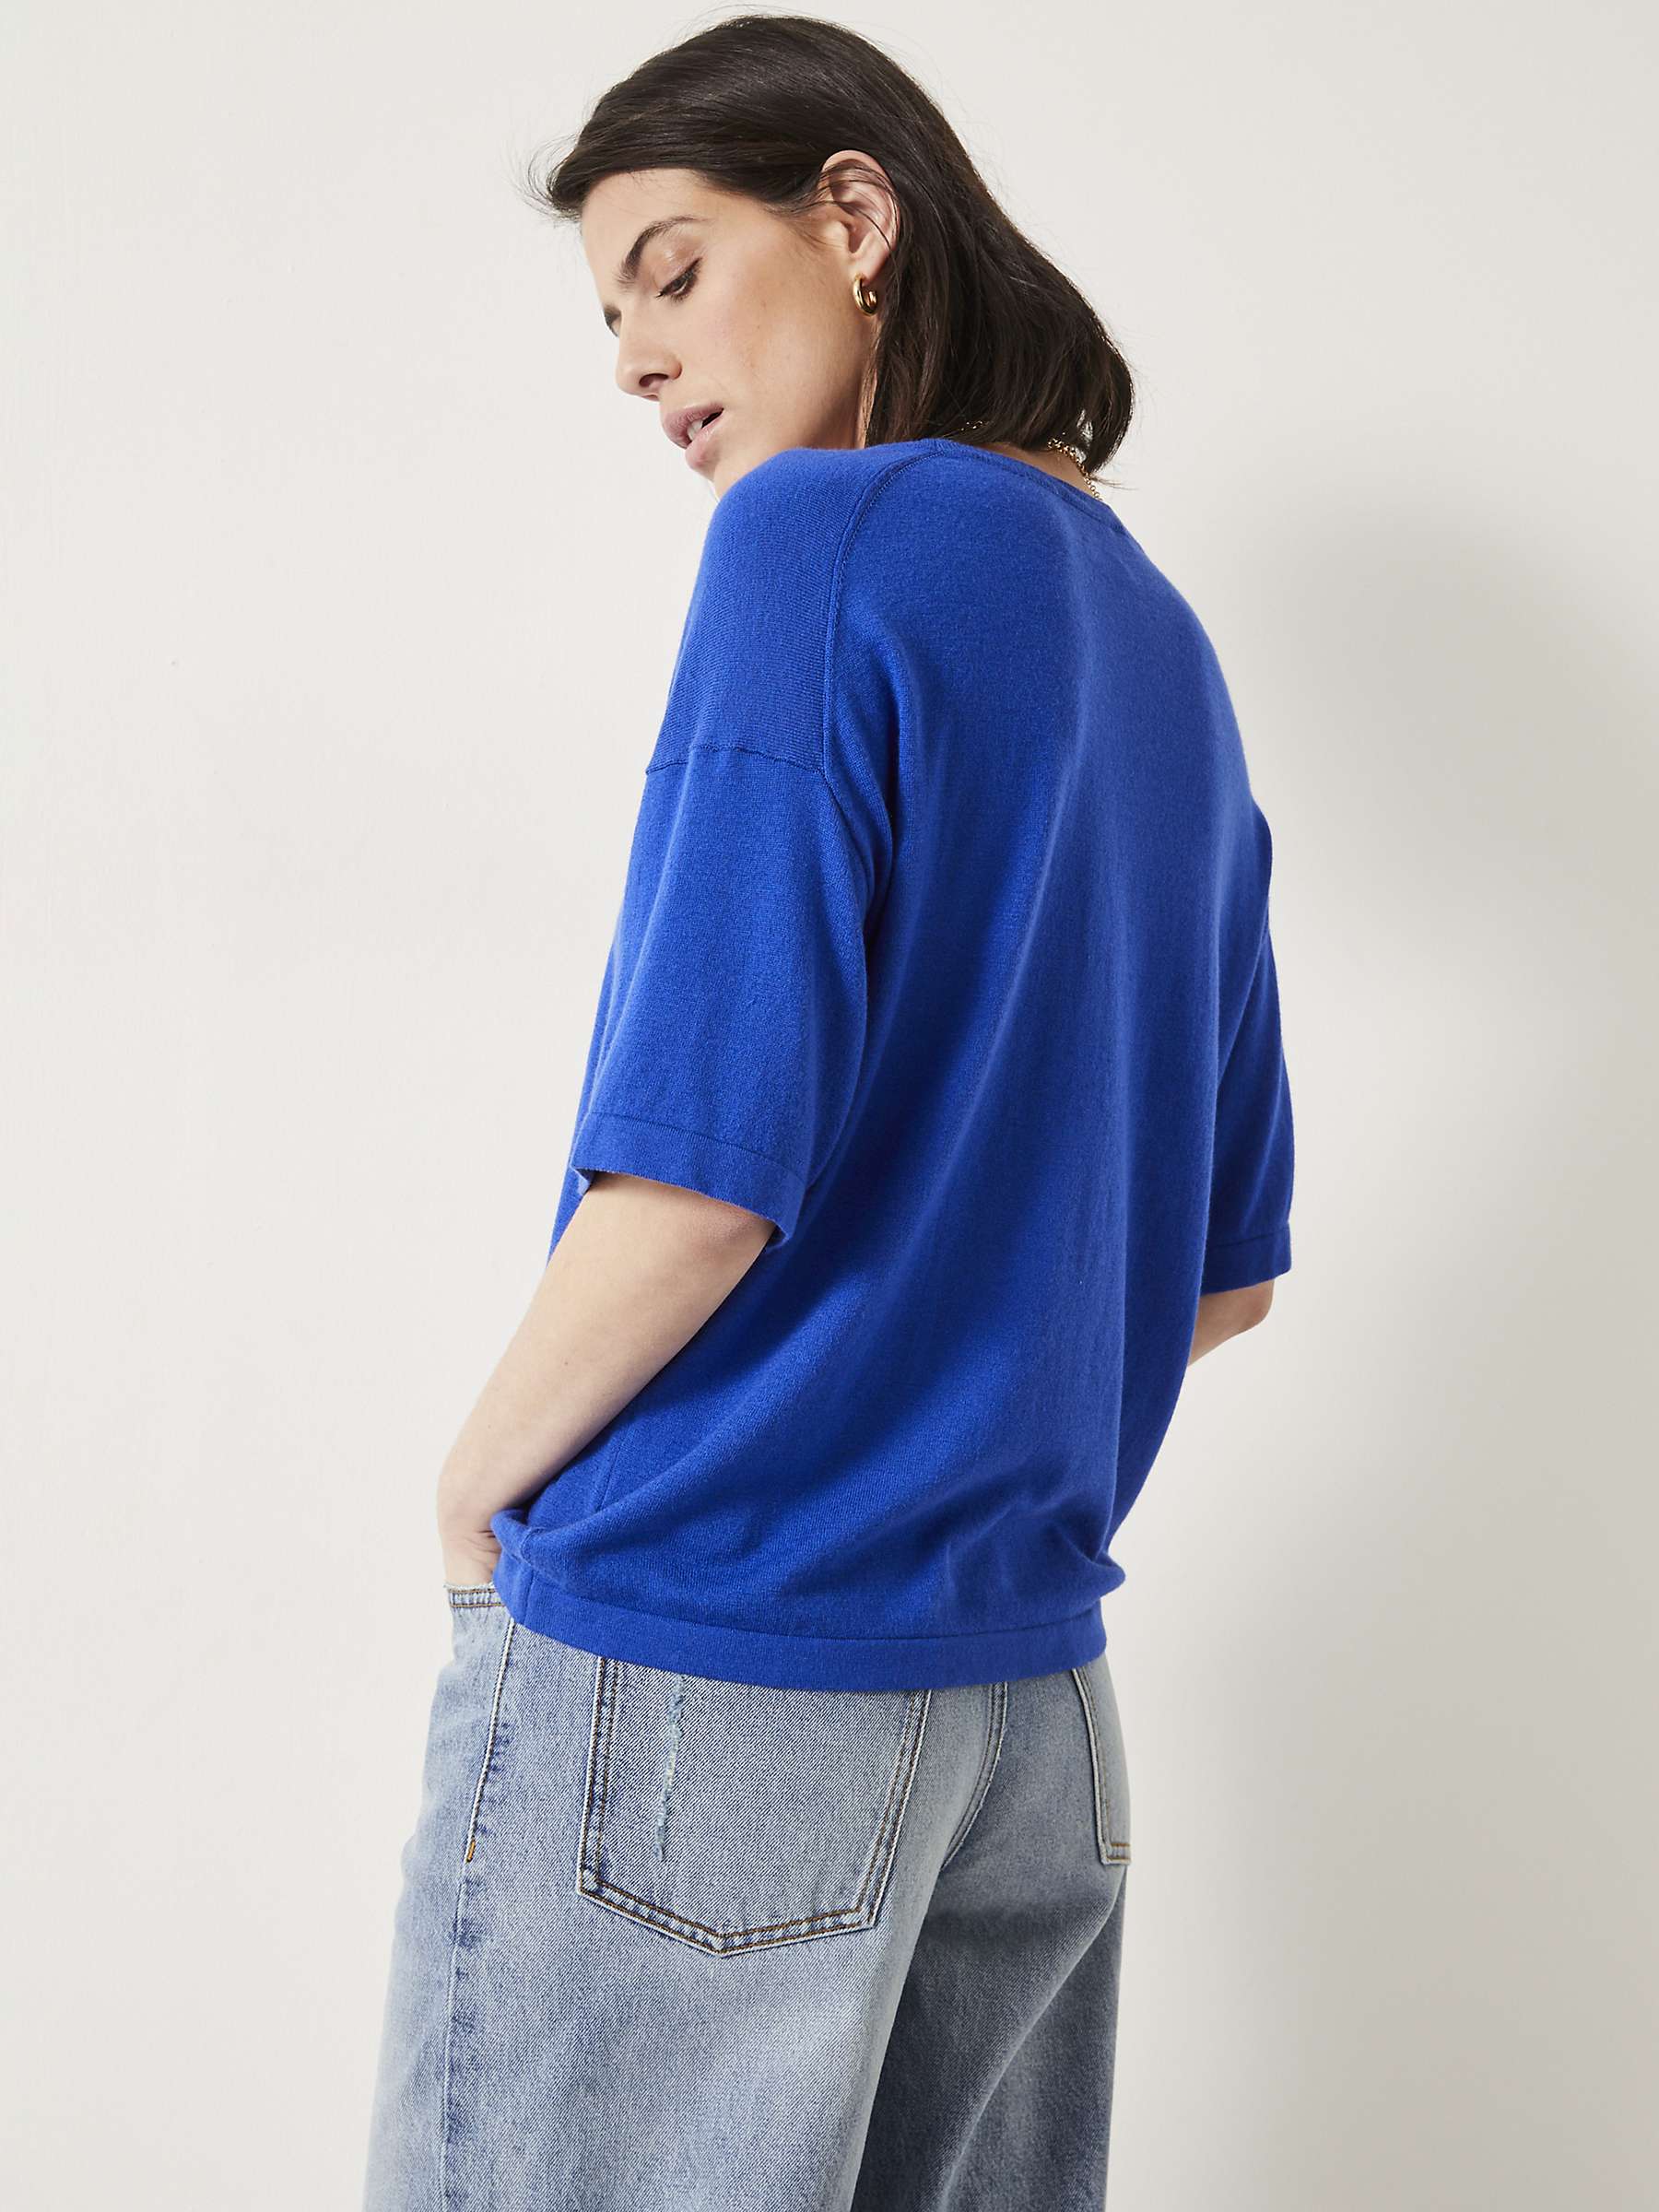 Buy HUSH Linzy Knitted T-Shirt, Bright Blue Online at johnlewis.com